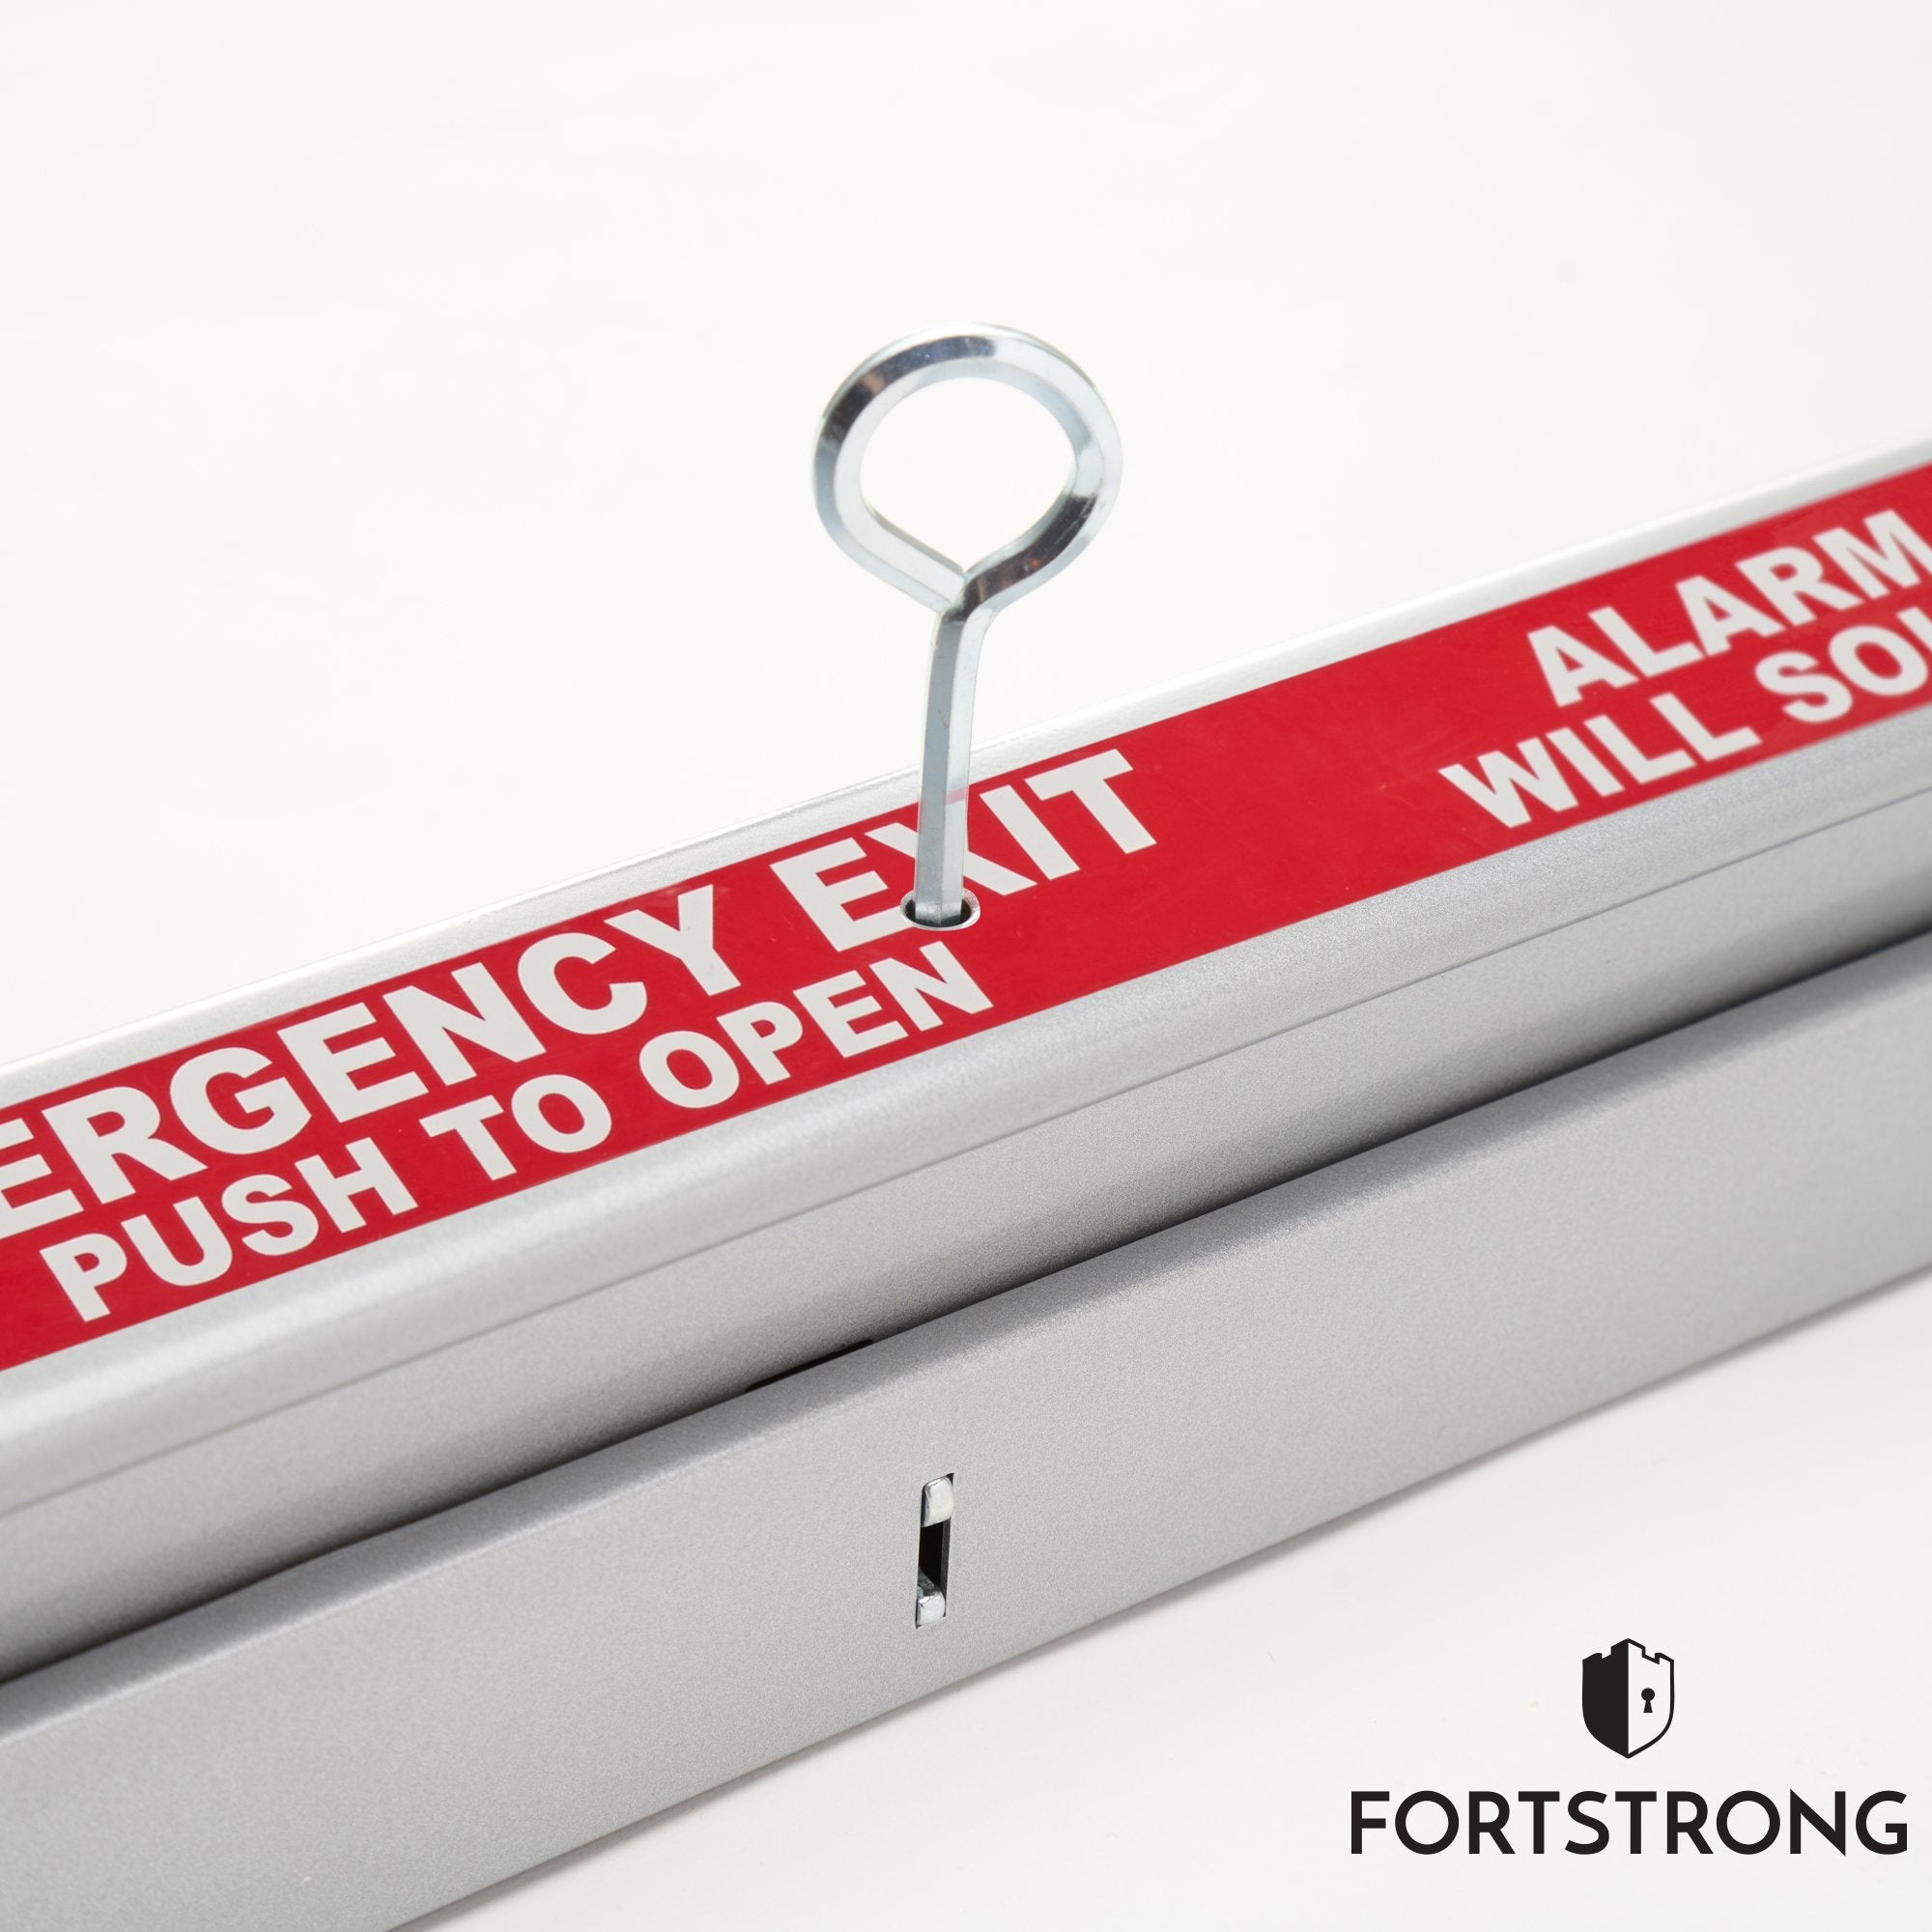 Panic Bar with Alarm and Emergency Warning Sticker